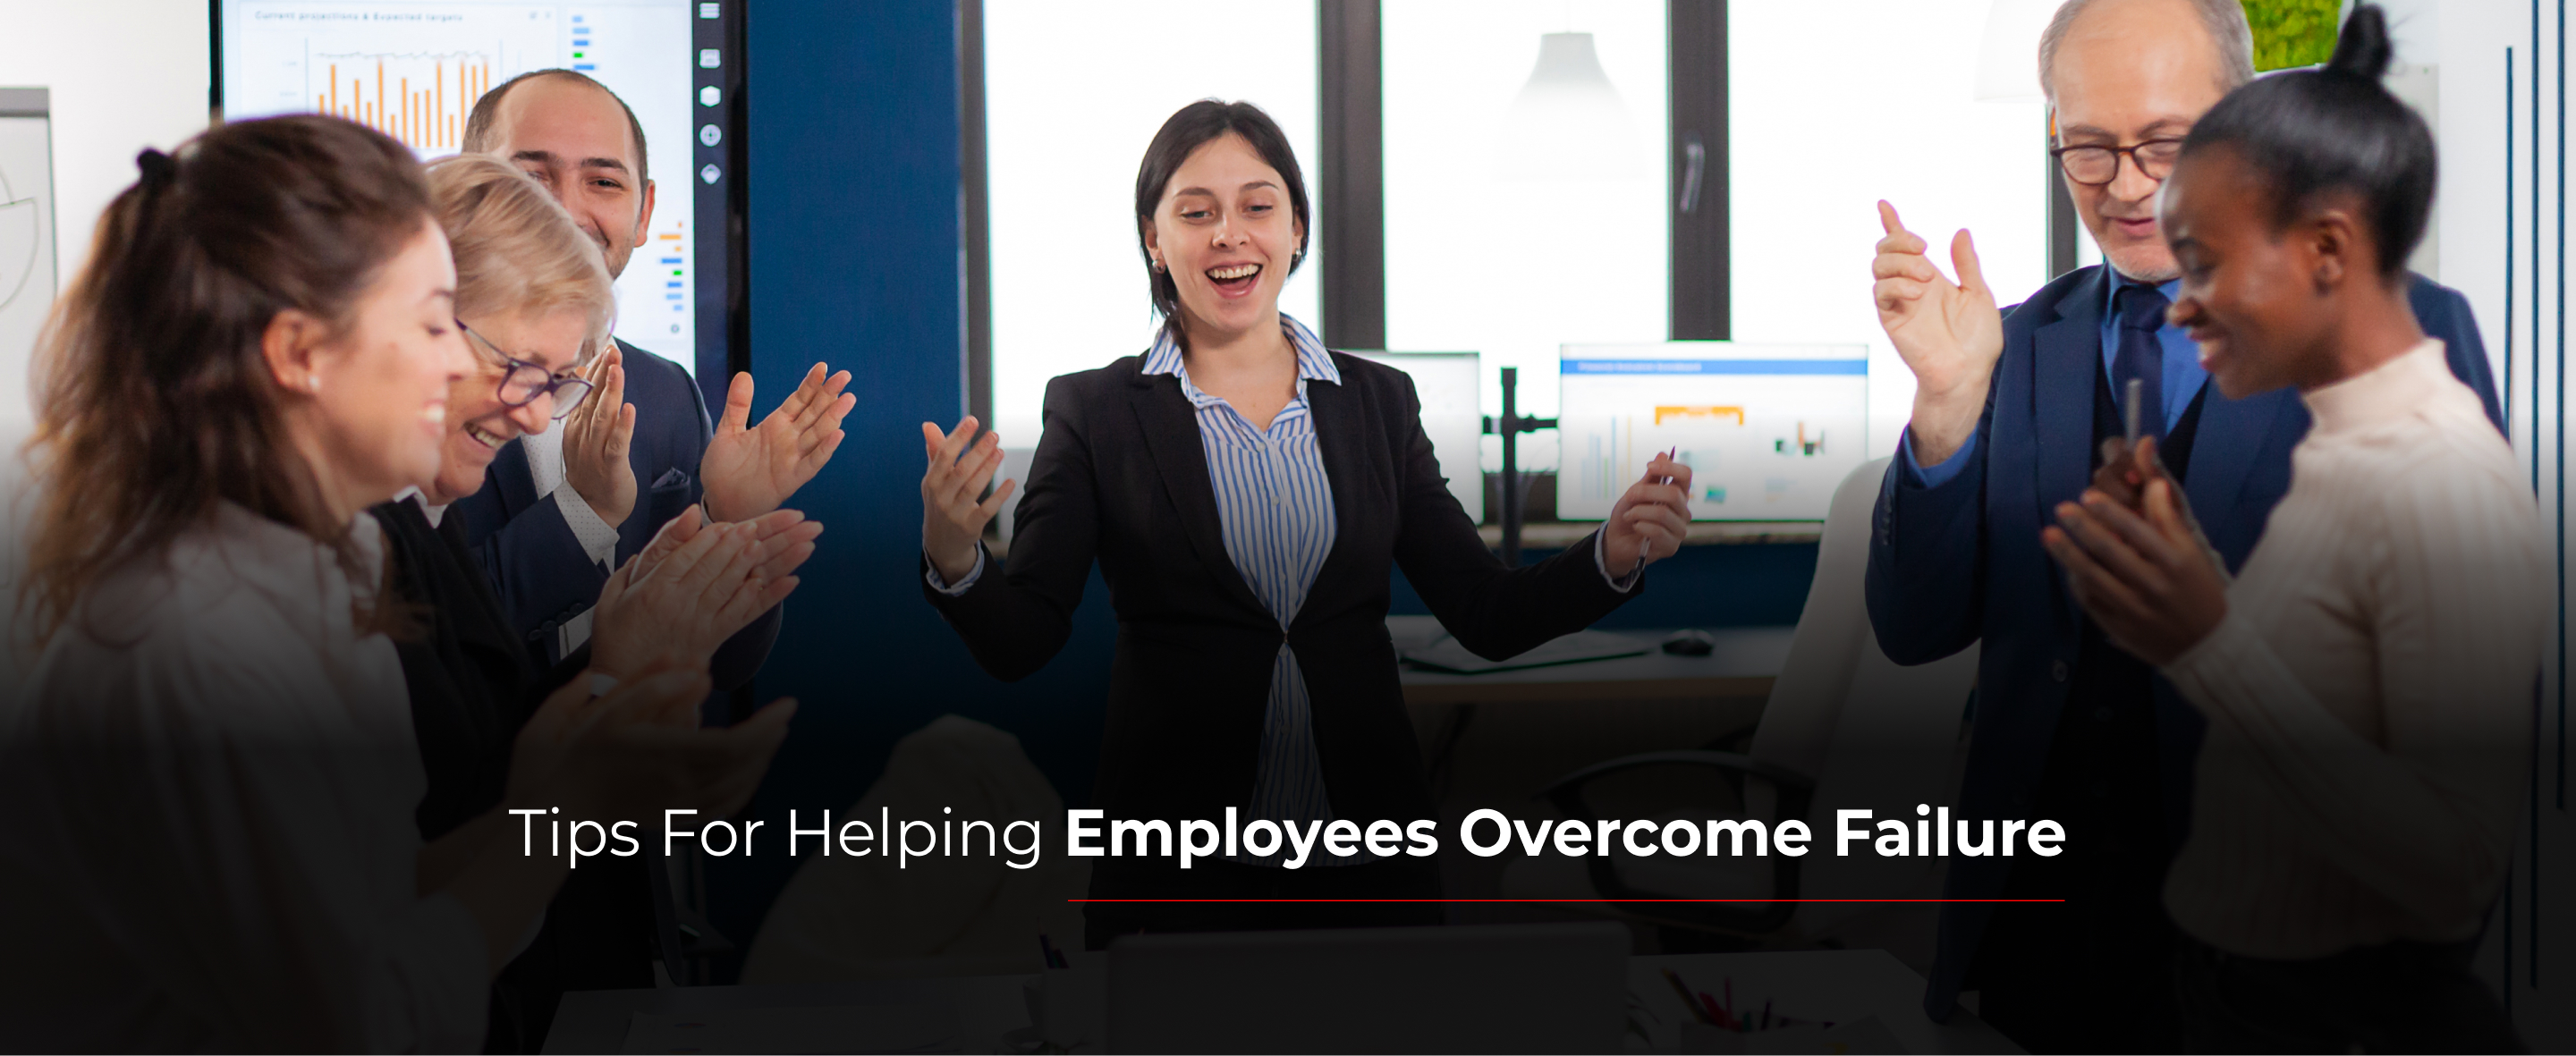 Tips For Helping Employees Overcome Failure